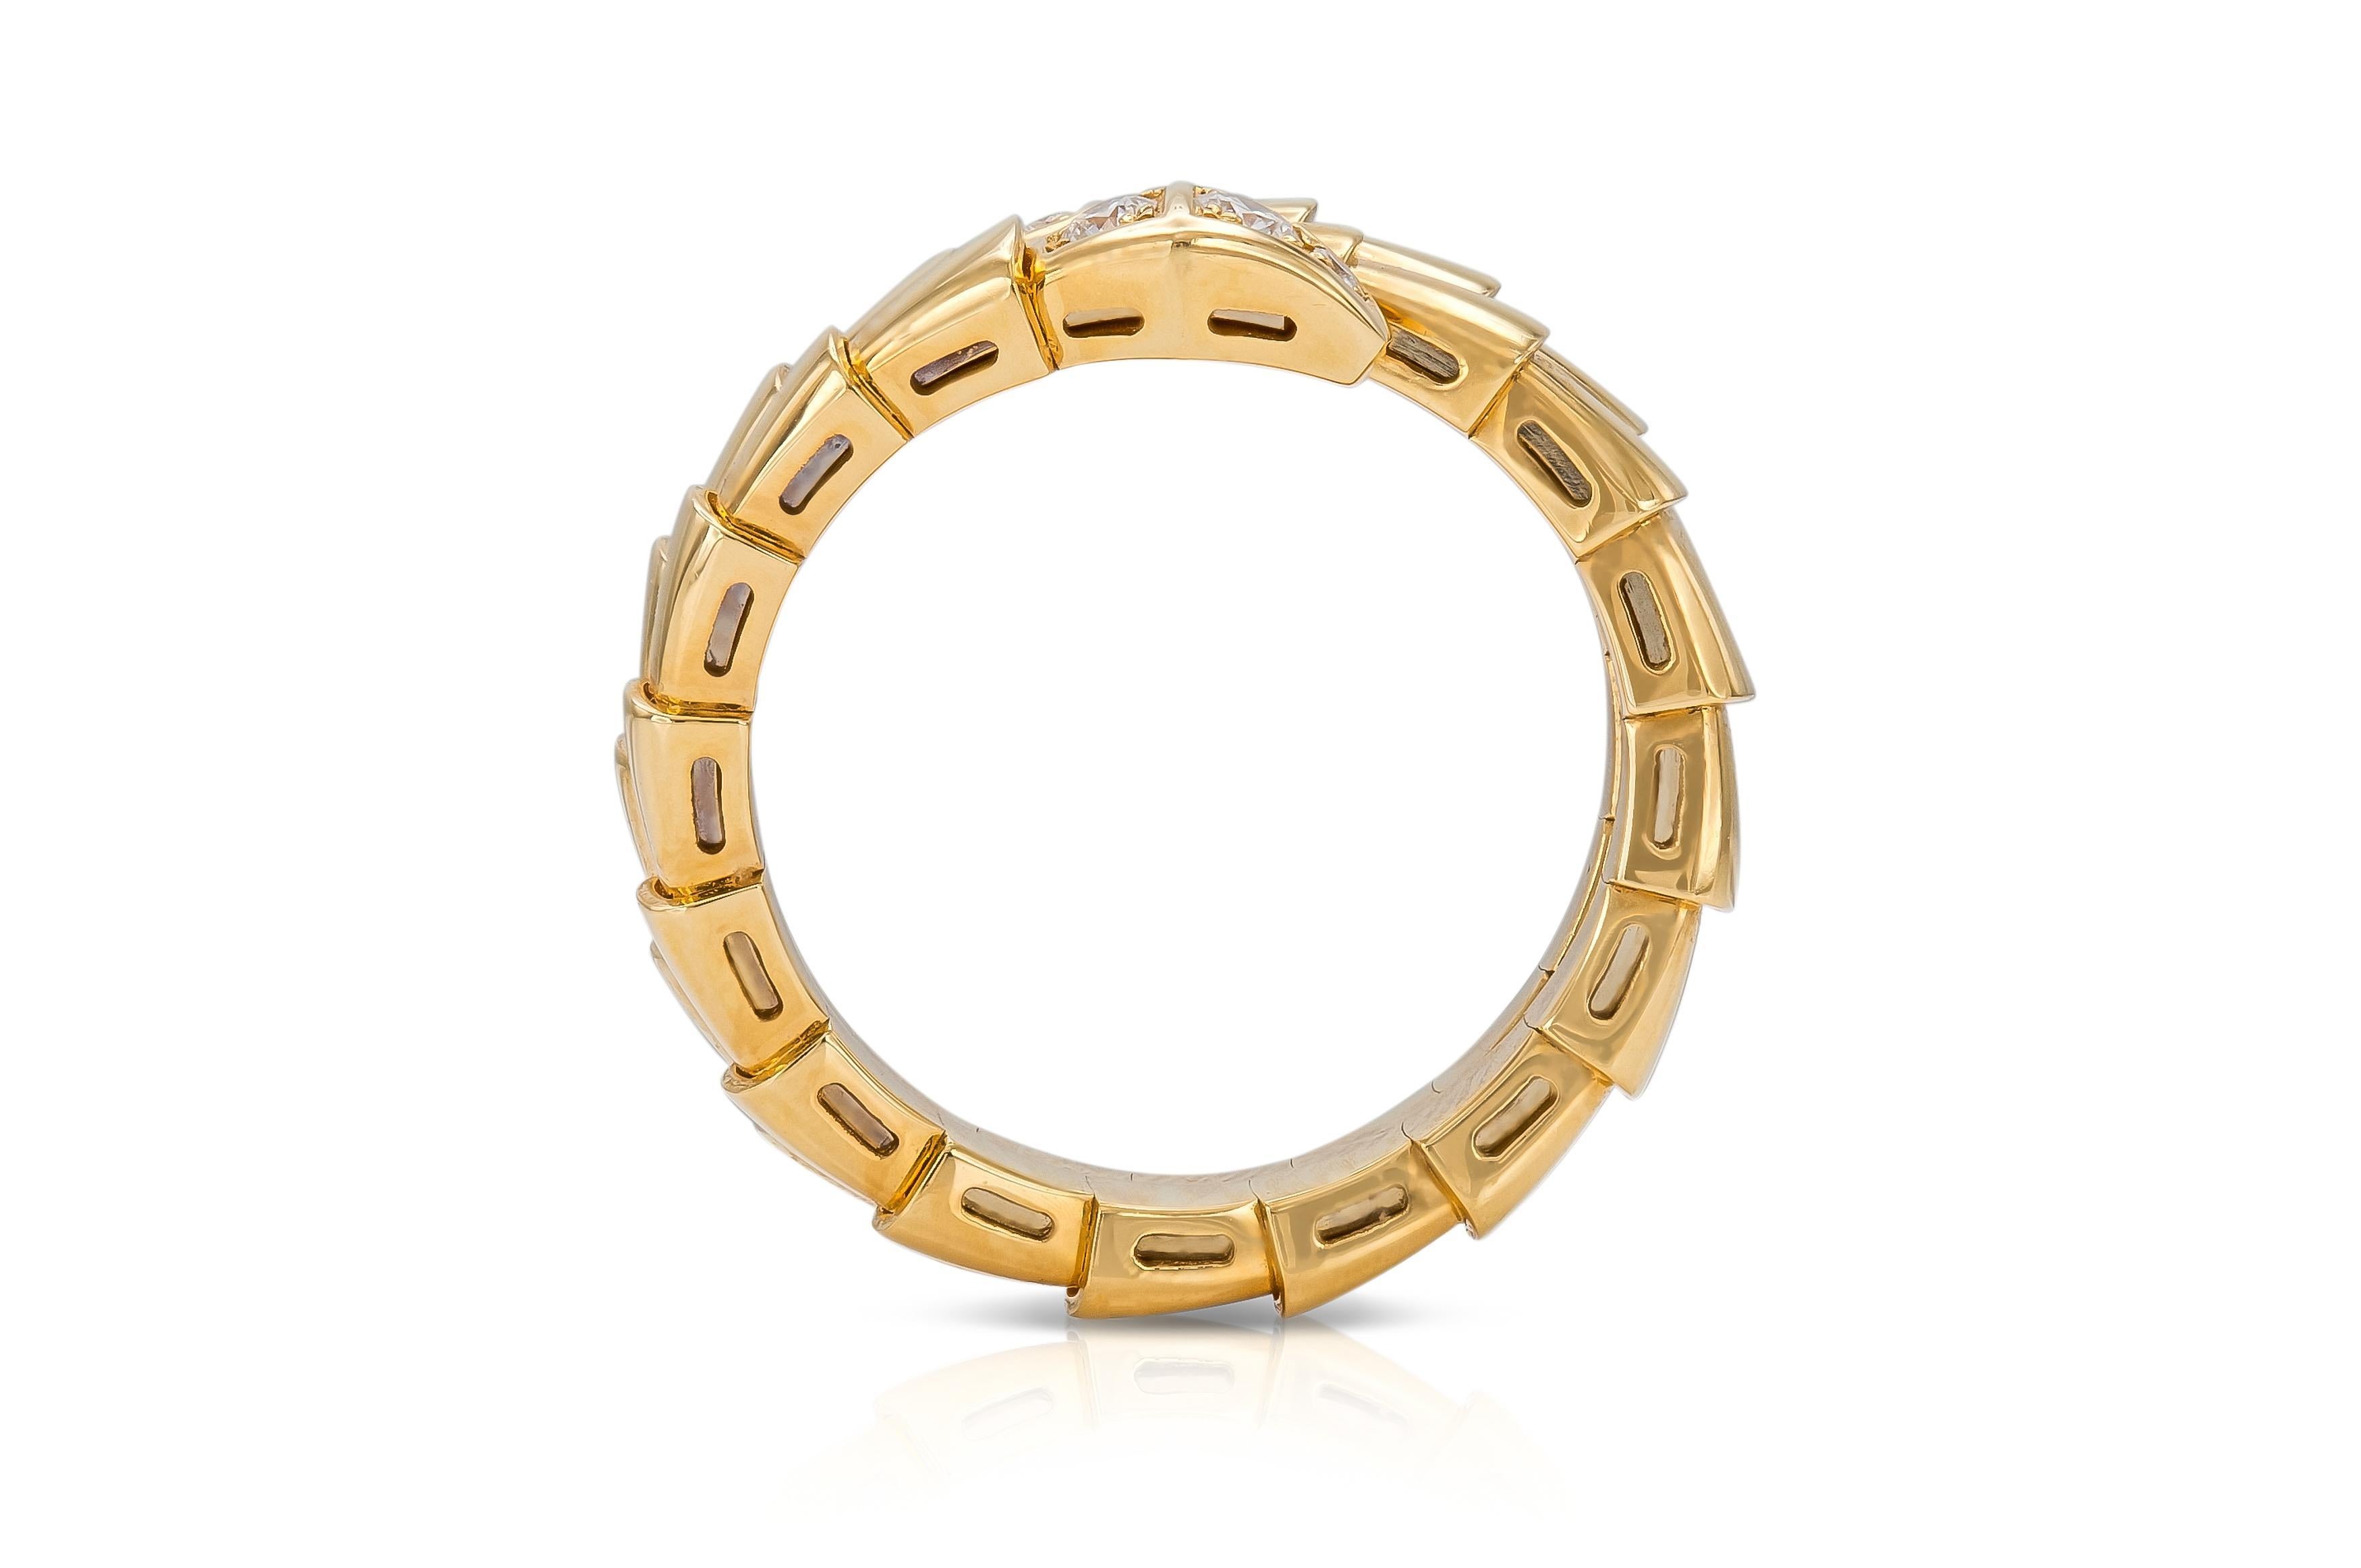 Finely crafted in 18k yellow gold with small Round Brilliant cut Diamonds.
Signed by Bvlgari, from their Serpenti collection
Size 6
Comes with its original box.